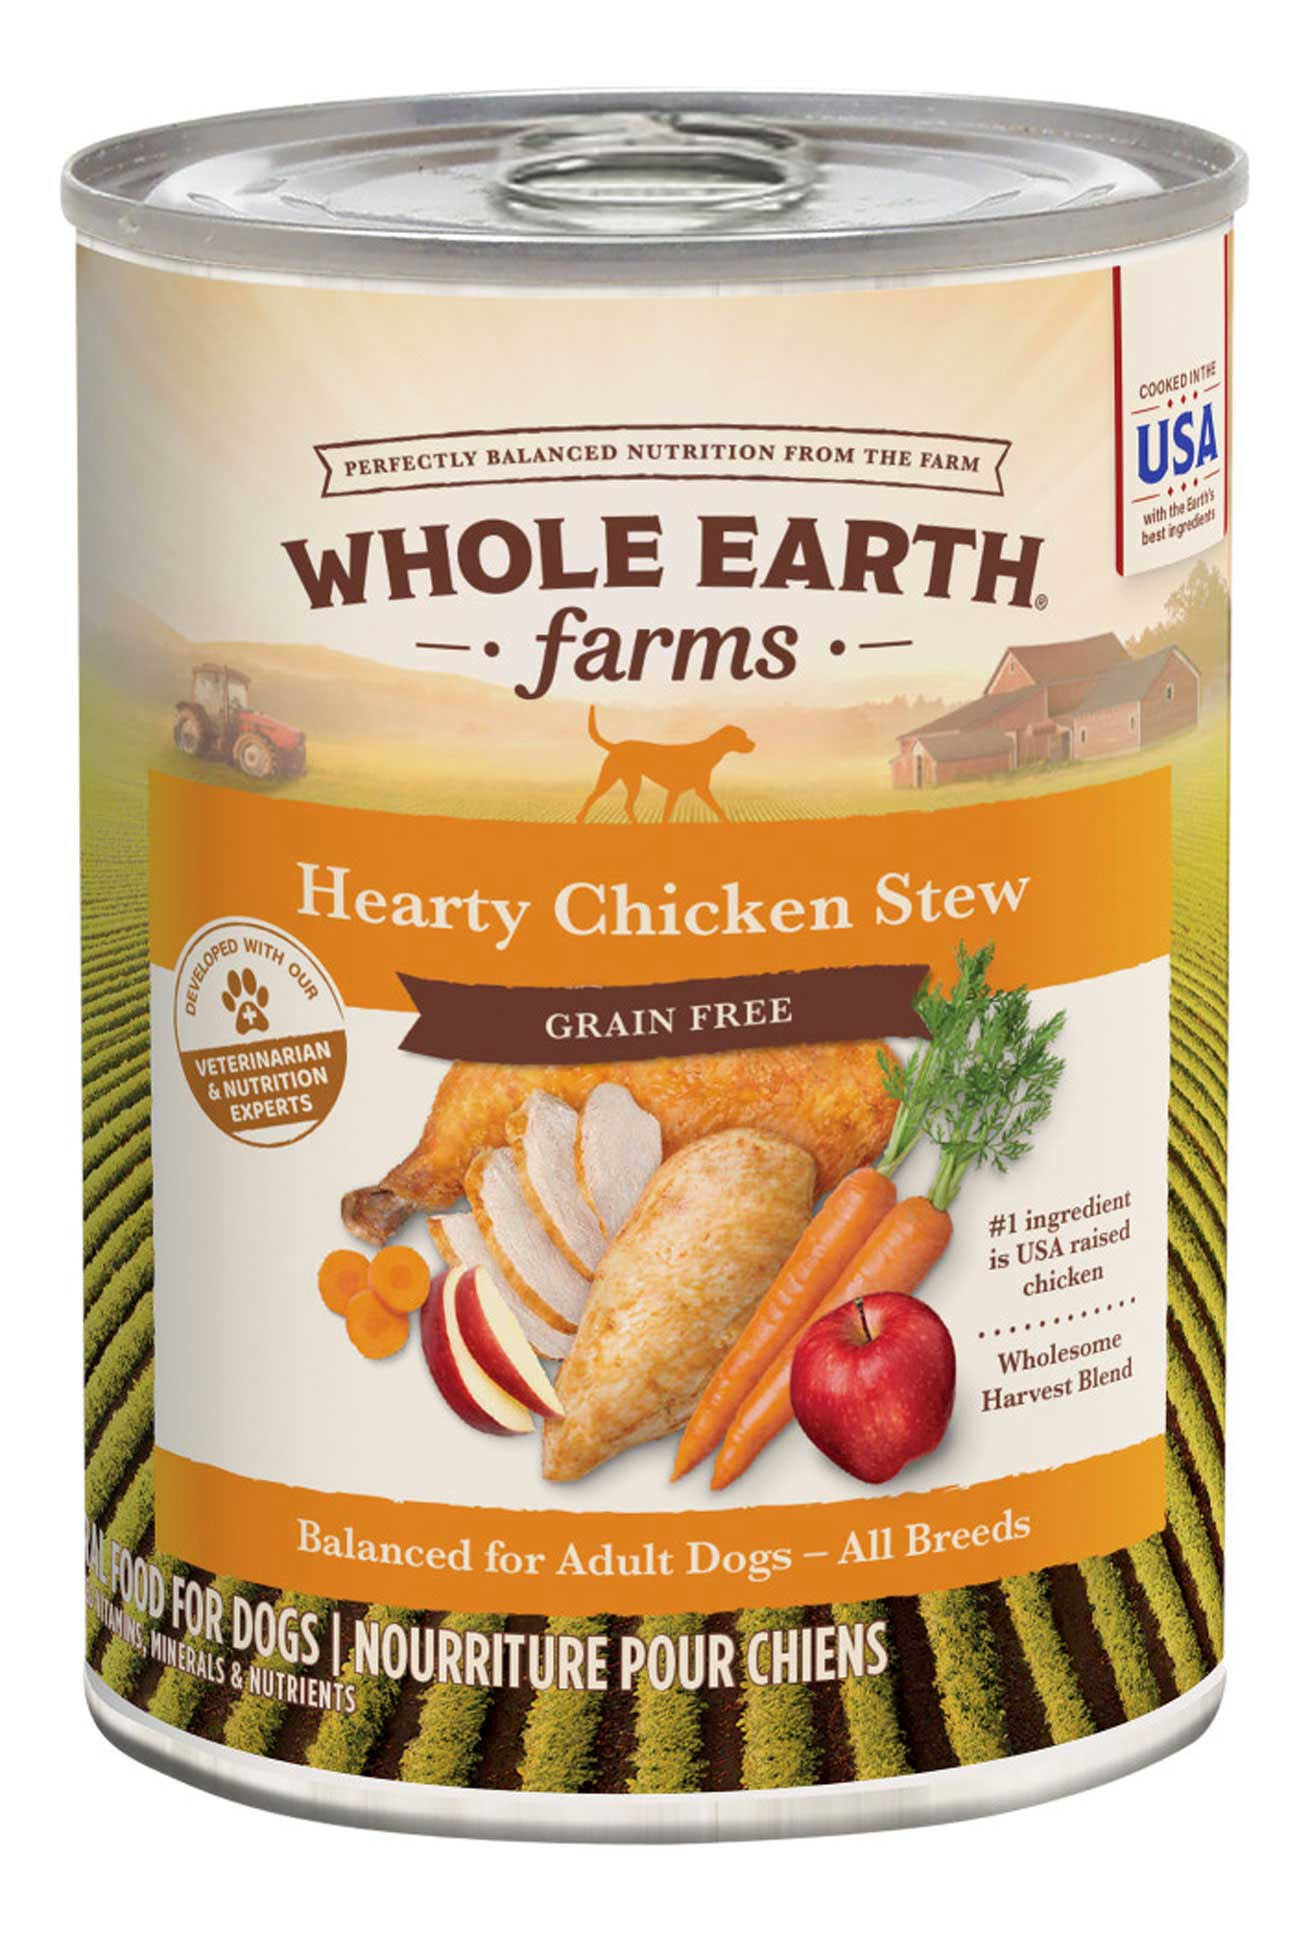 Whole Earth Farms Grain Free Canned Dog Food - Hearty Chicken Stew, 12.7oz